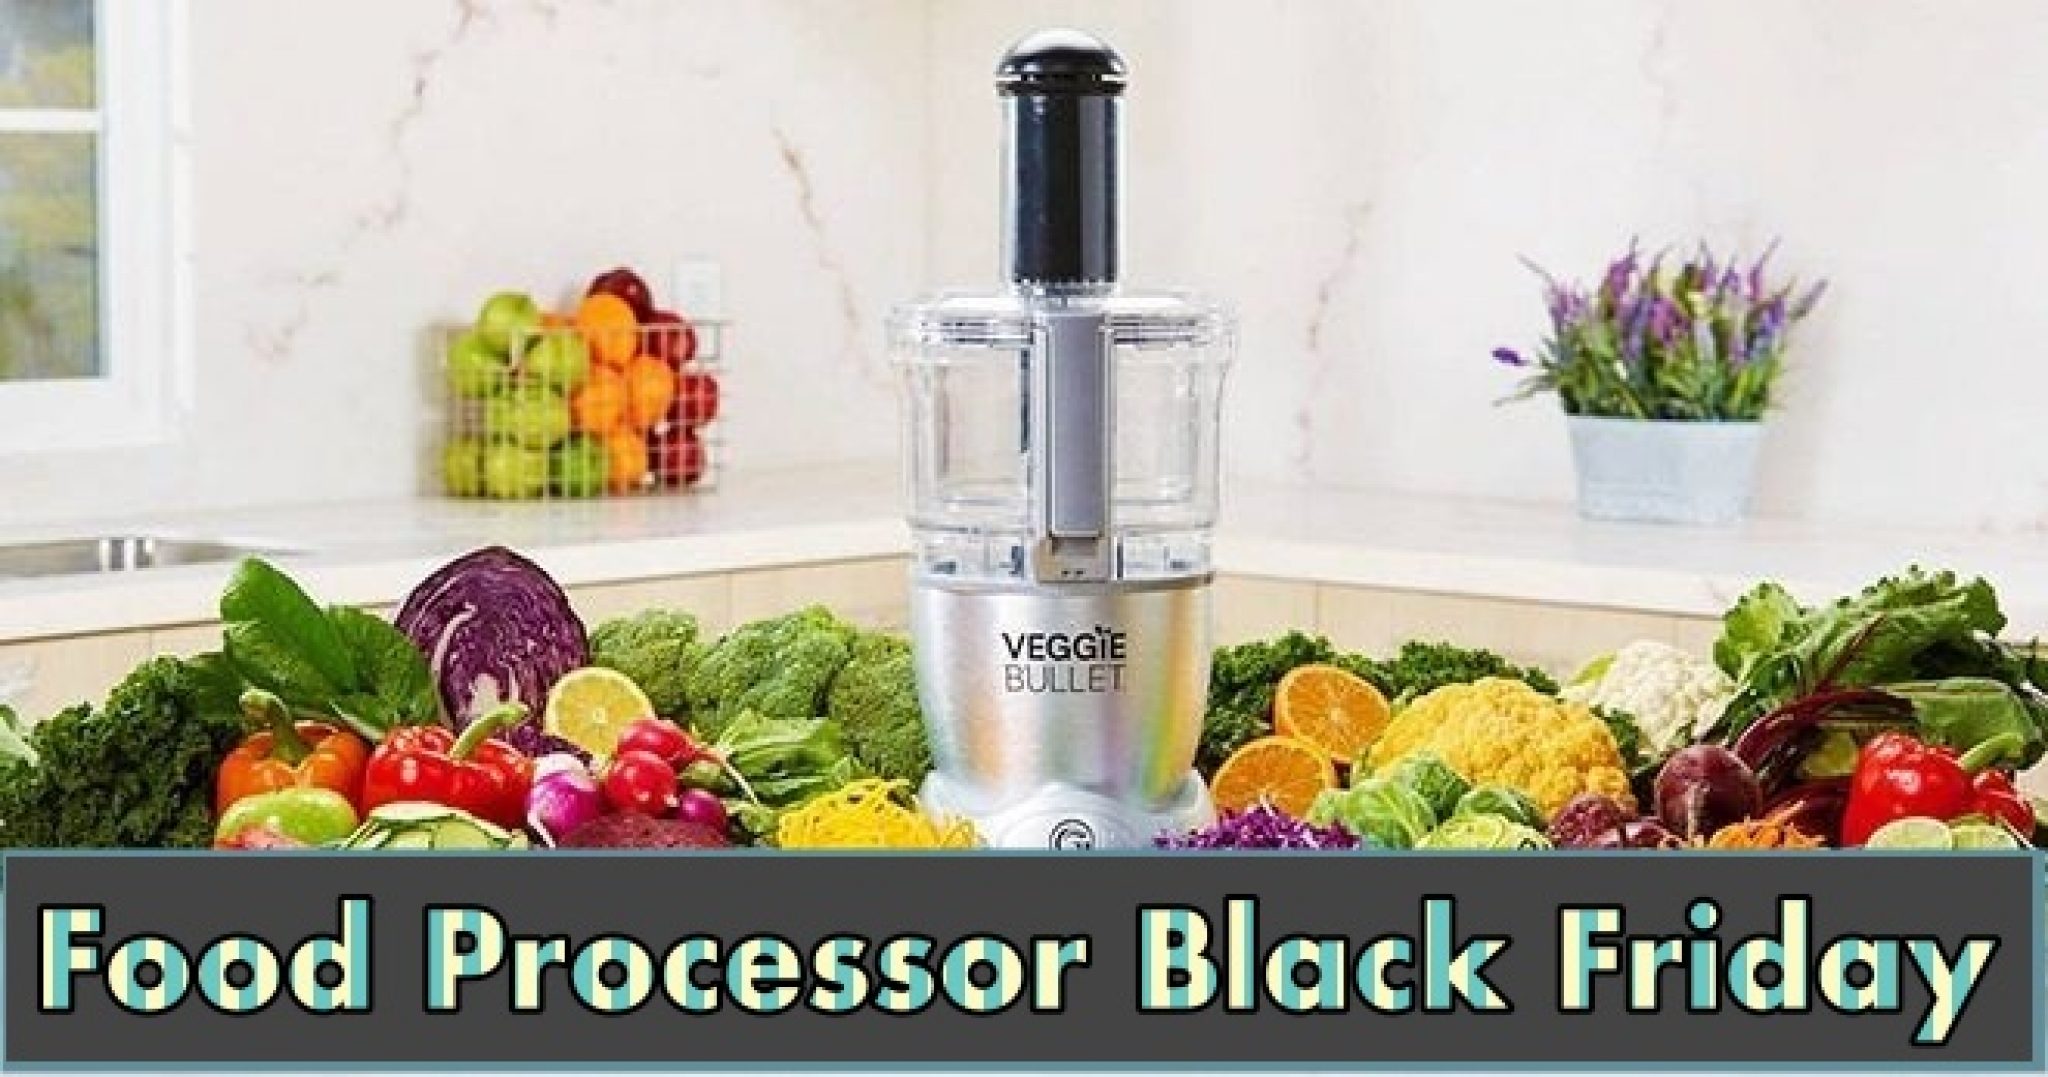 Food Processor Black Friday 2021 Deals This Month ...